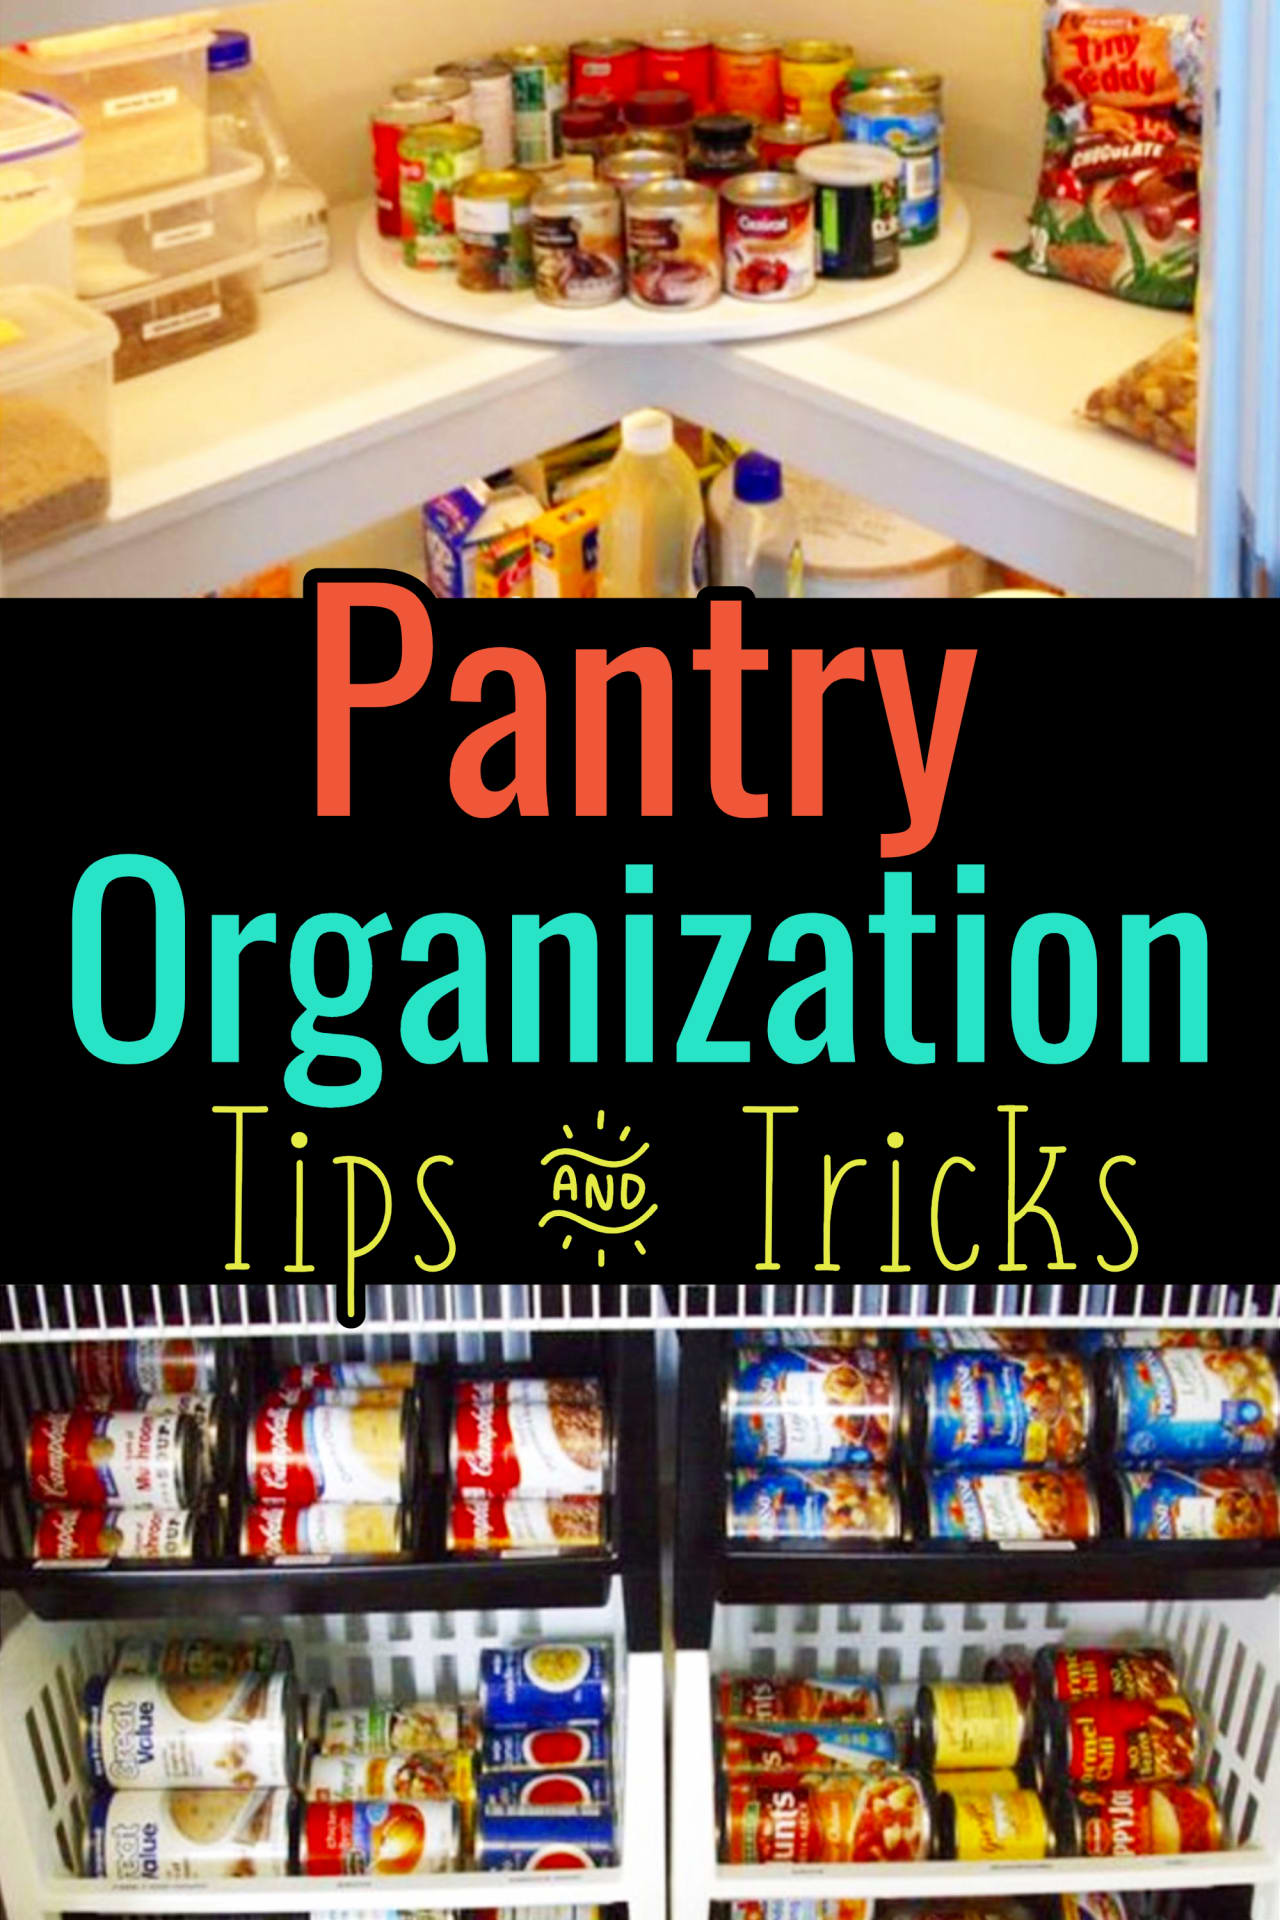 Pantry Organization! Declutter and organize your kitchen pantry with these pantry organization tips and tricks.  The pantry attracts so much clutter here's how Professional Organizers get organized in kitchen pantry areas (put this in your printable household notebook!)